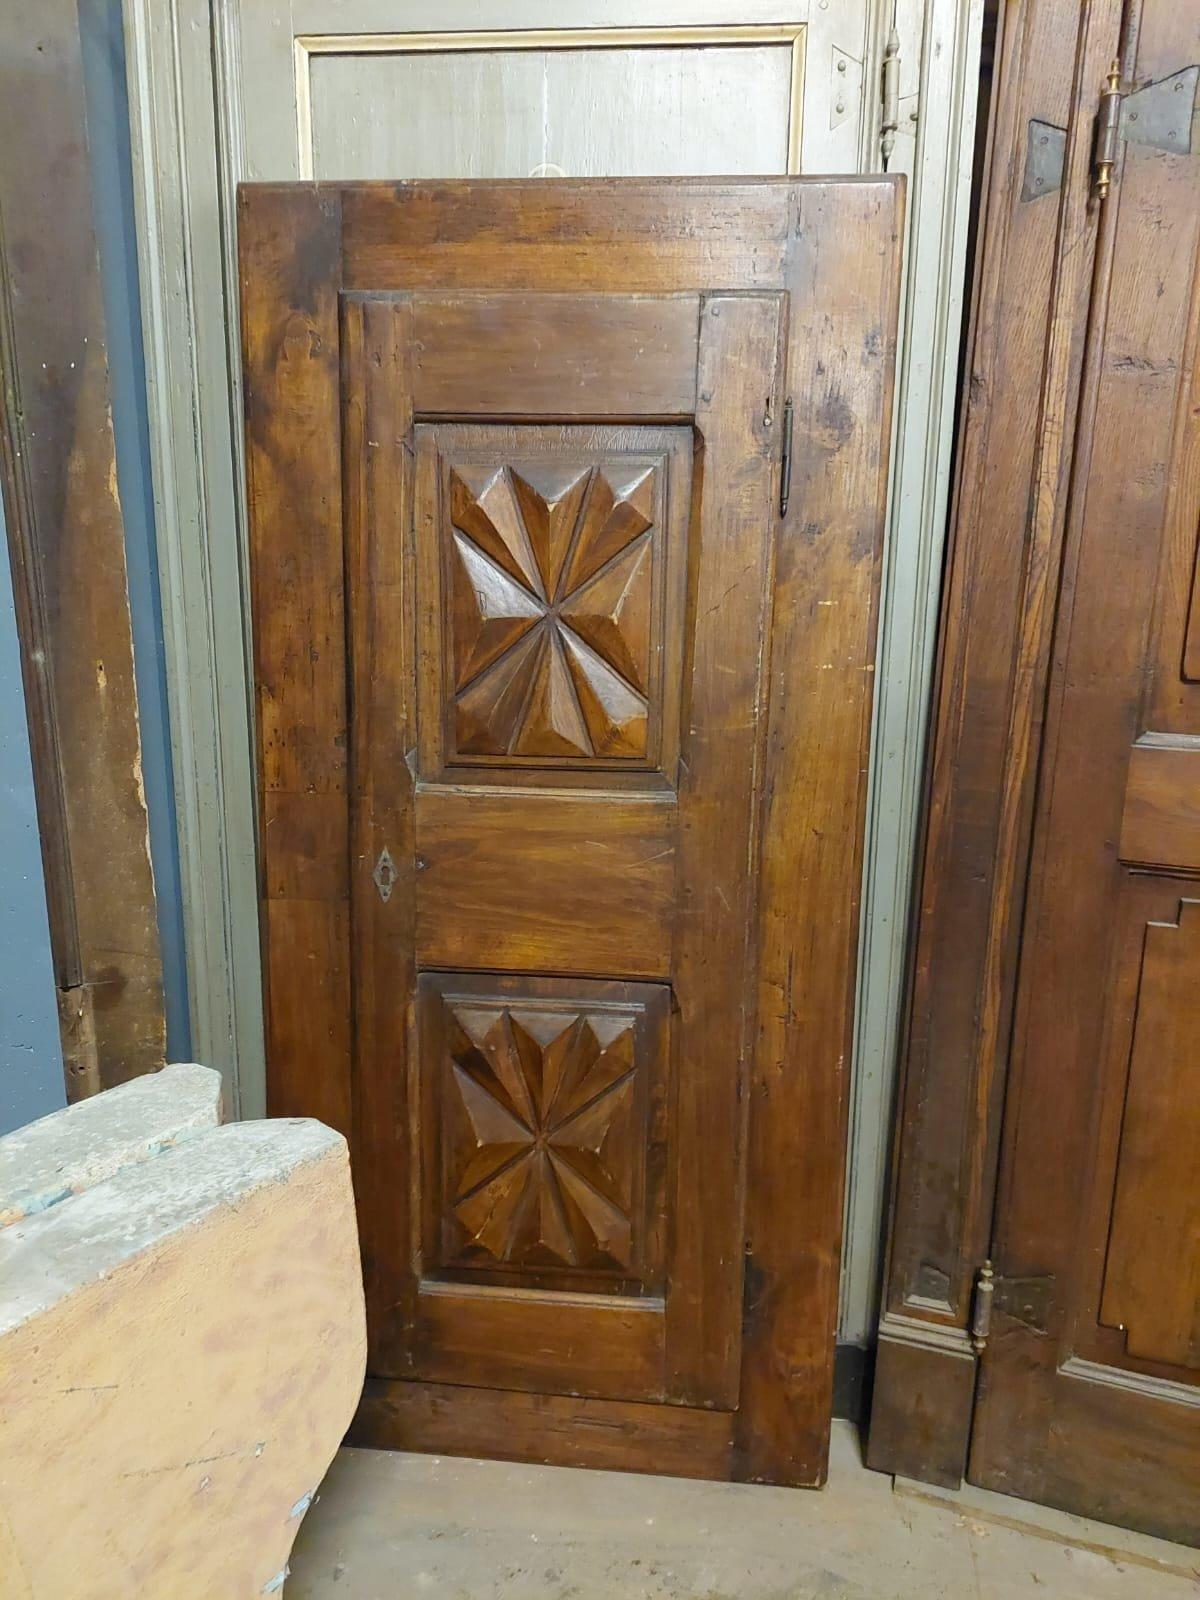 Ancient Piedmontese poplar wall cabinet, enriched with precious hand-made diamond point carving, built as a wardrobe placard in the 17th century.
Total measurements cm w 83 x h 176, door light only cm w 55 x h 148.